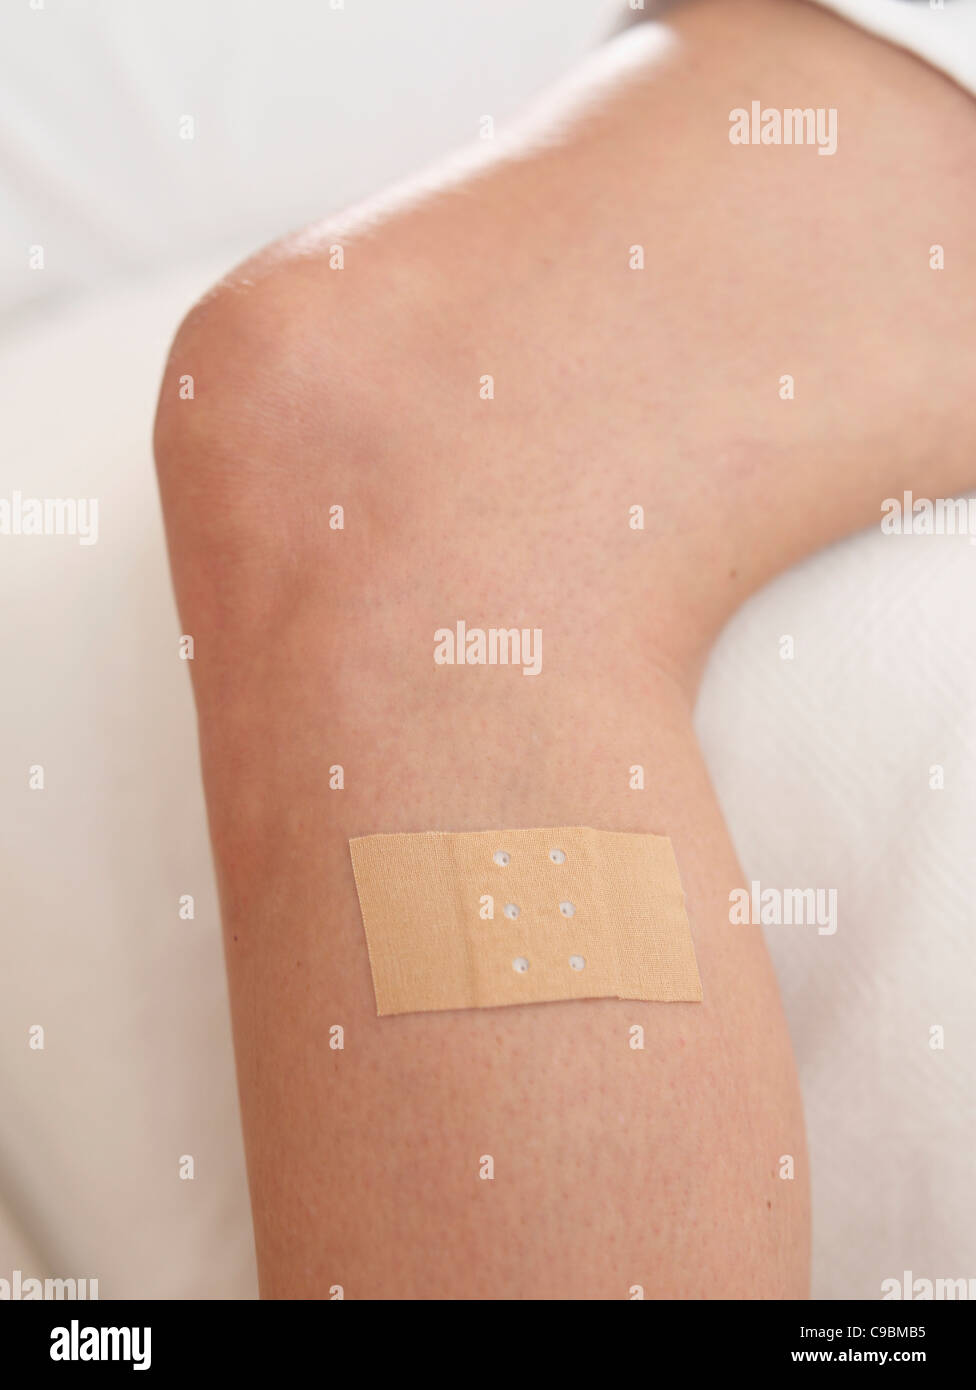 Human leg with band aid, close up Stock Photo